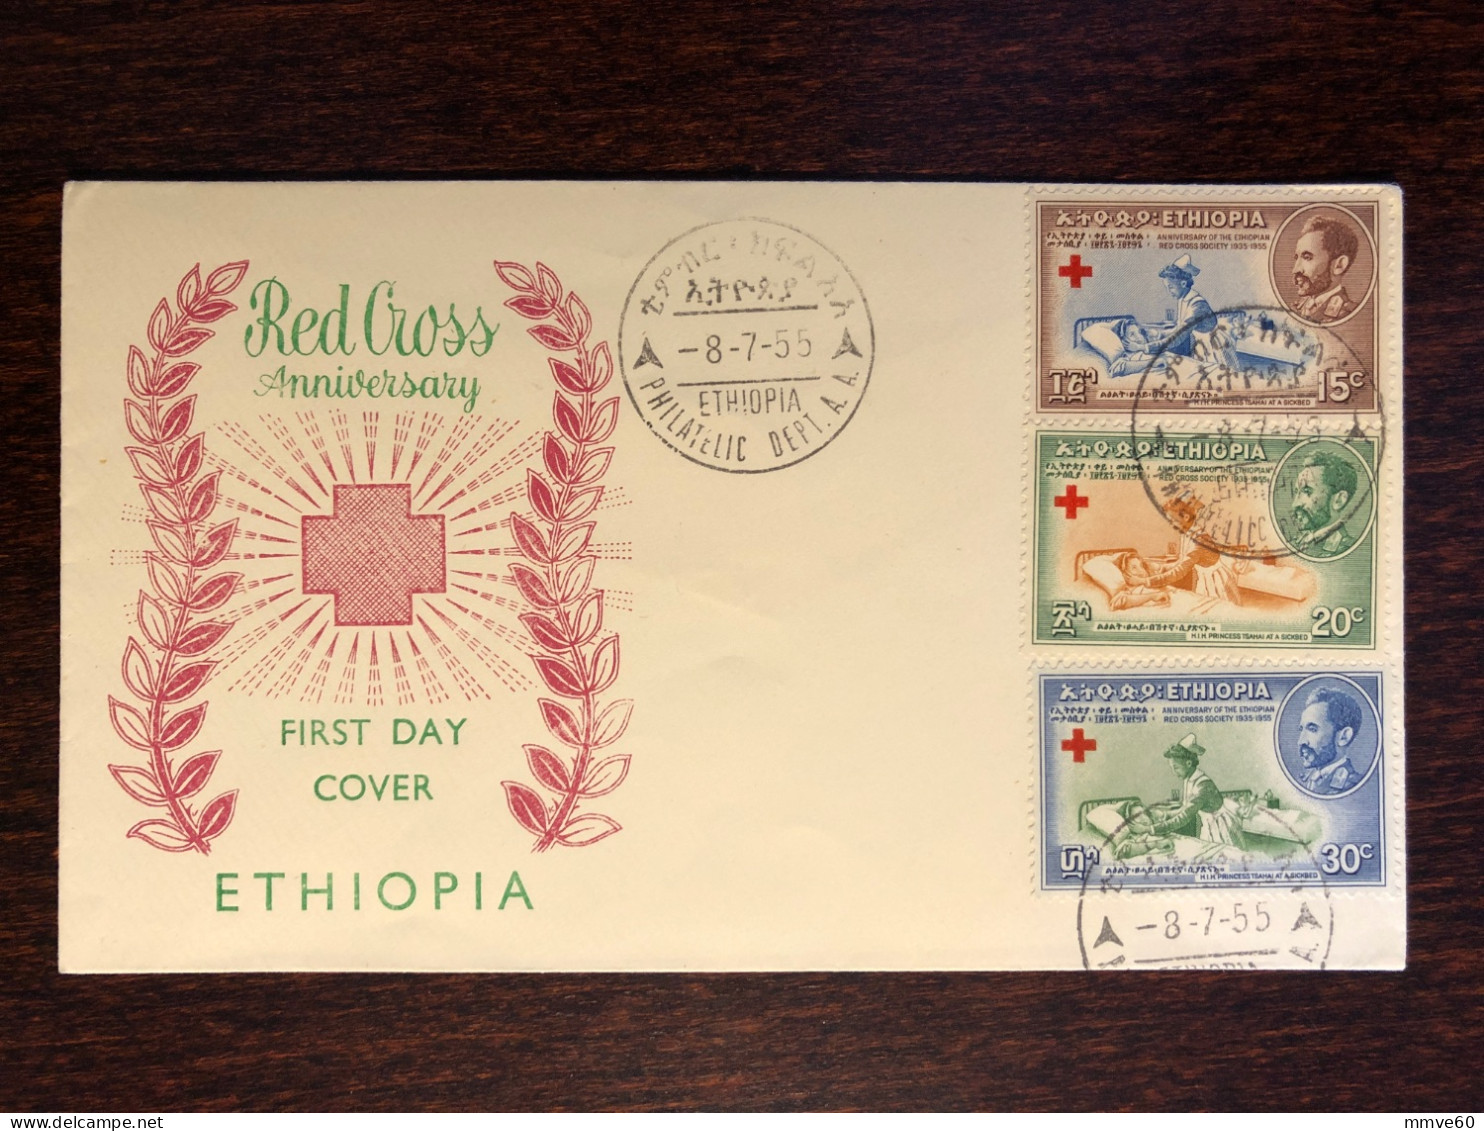 ETHIOPIA FDC COVER 1955 YEAR RED CROSS HEALTH MEDICINE STAMPS - Etiopia